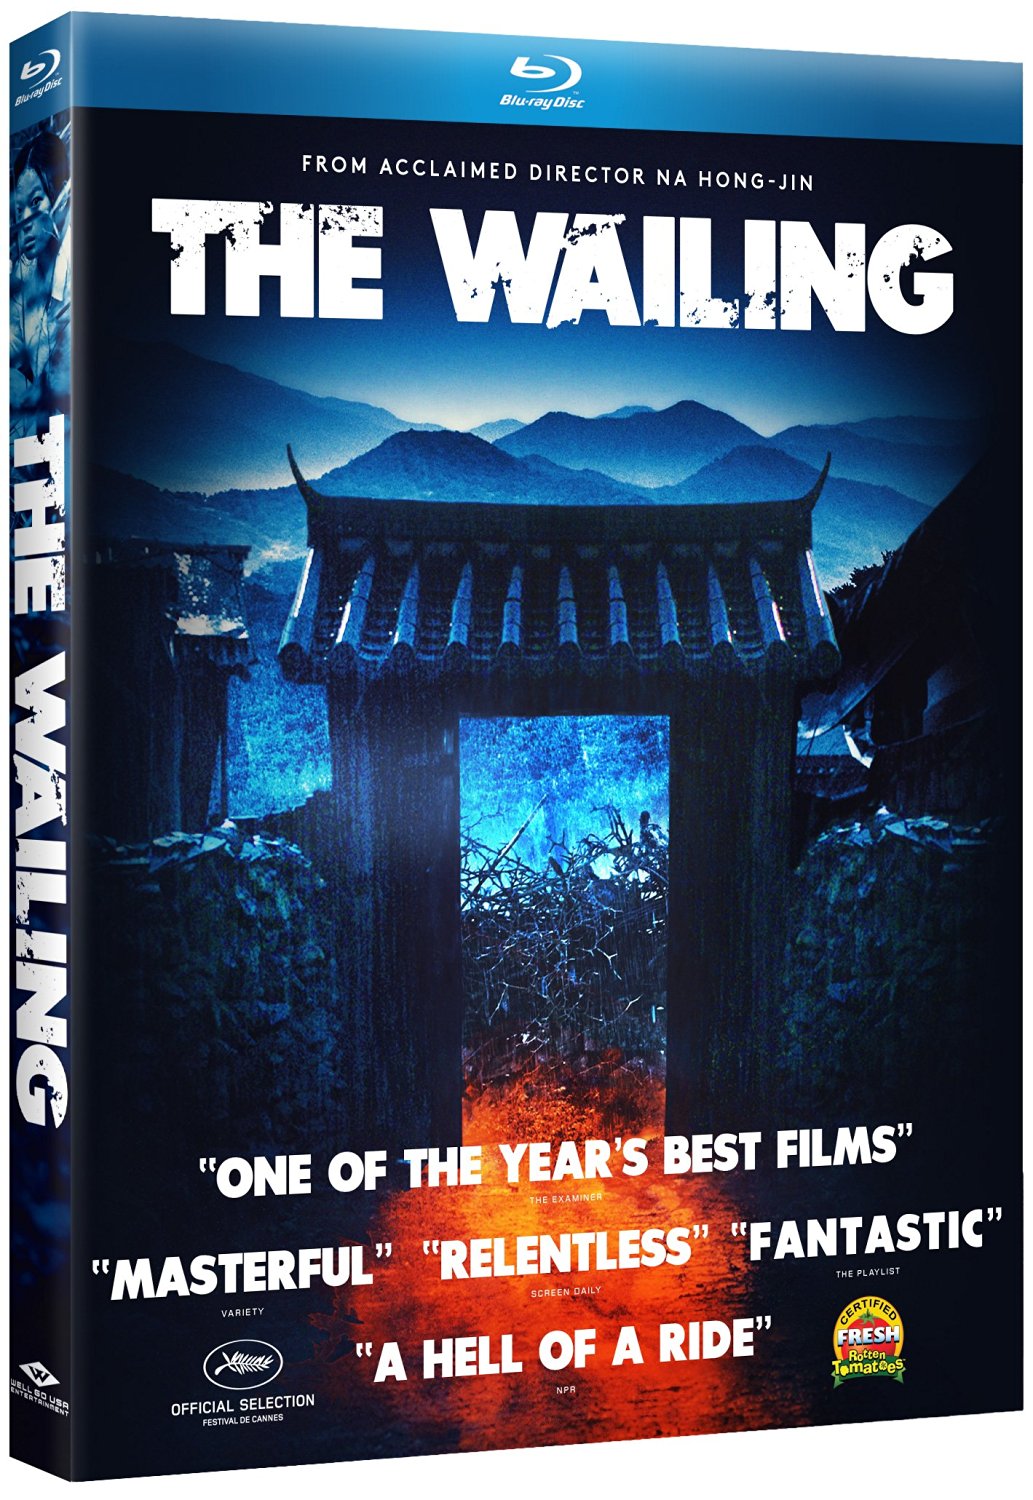 REAL MOVIE NEWS: The Wailing Blu-ray Review